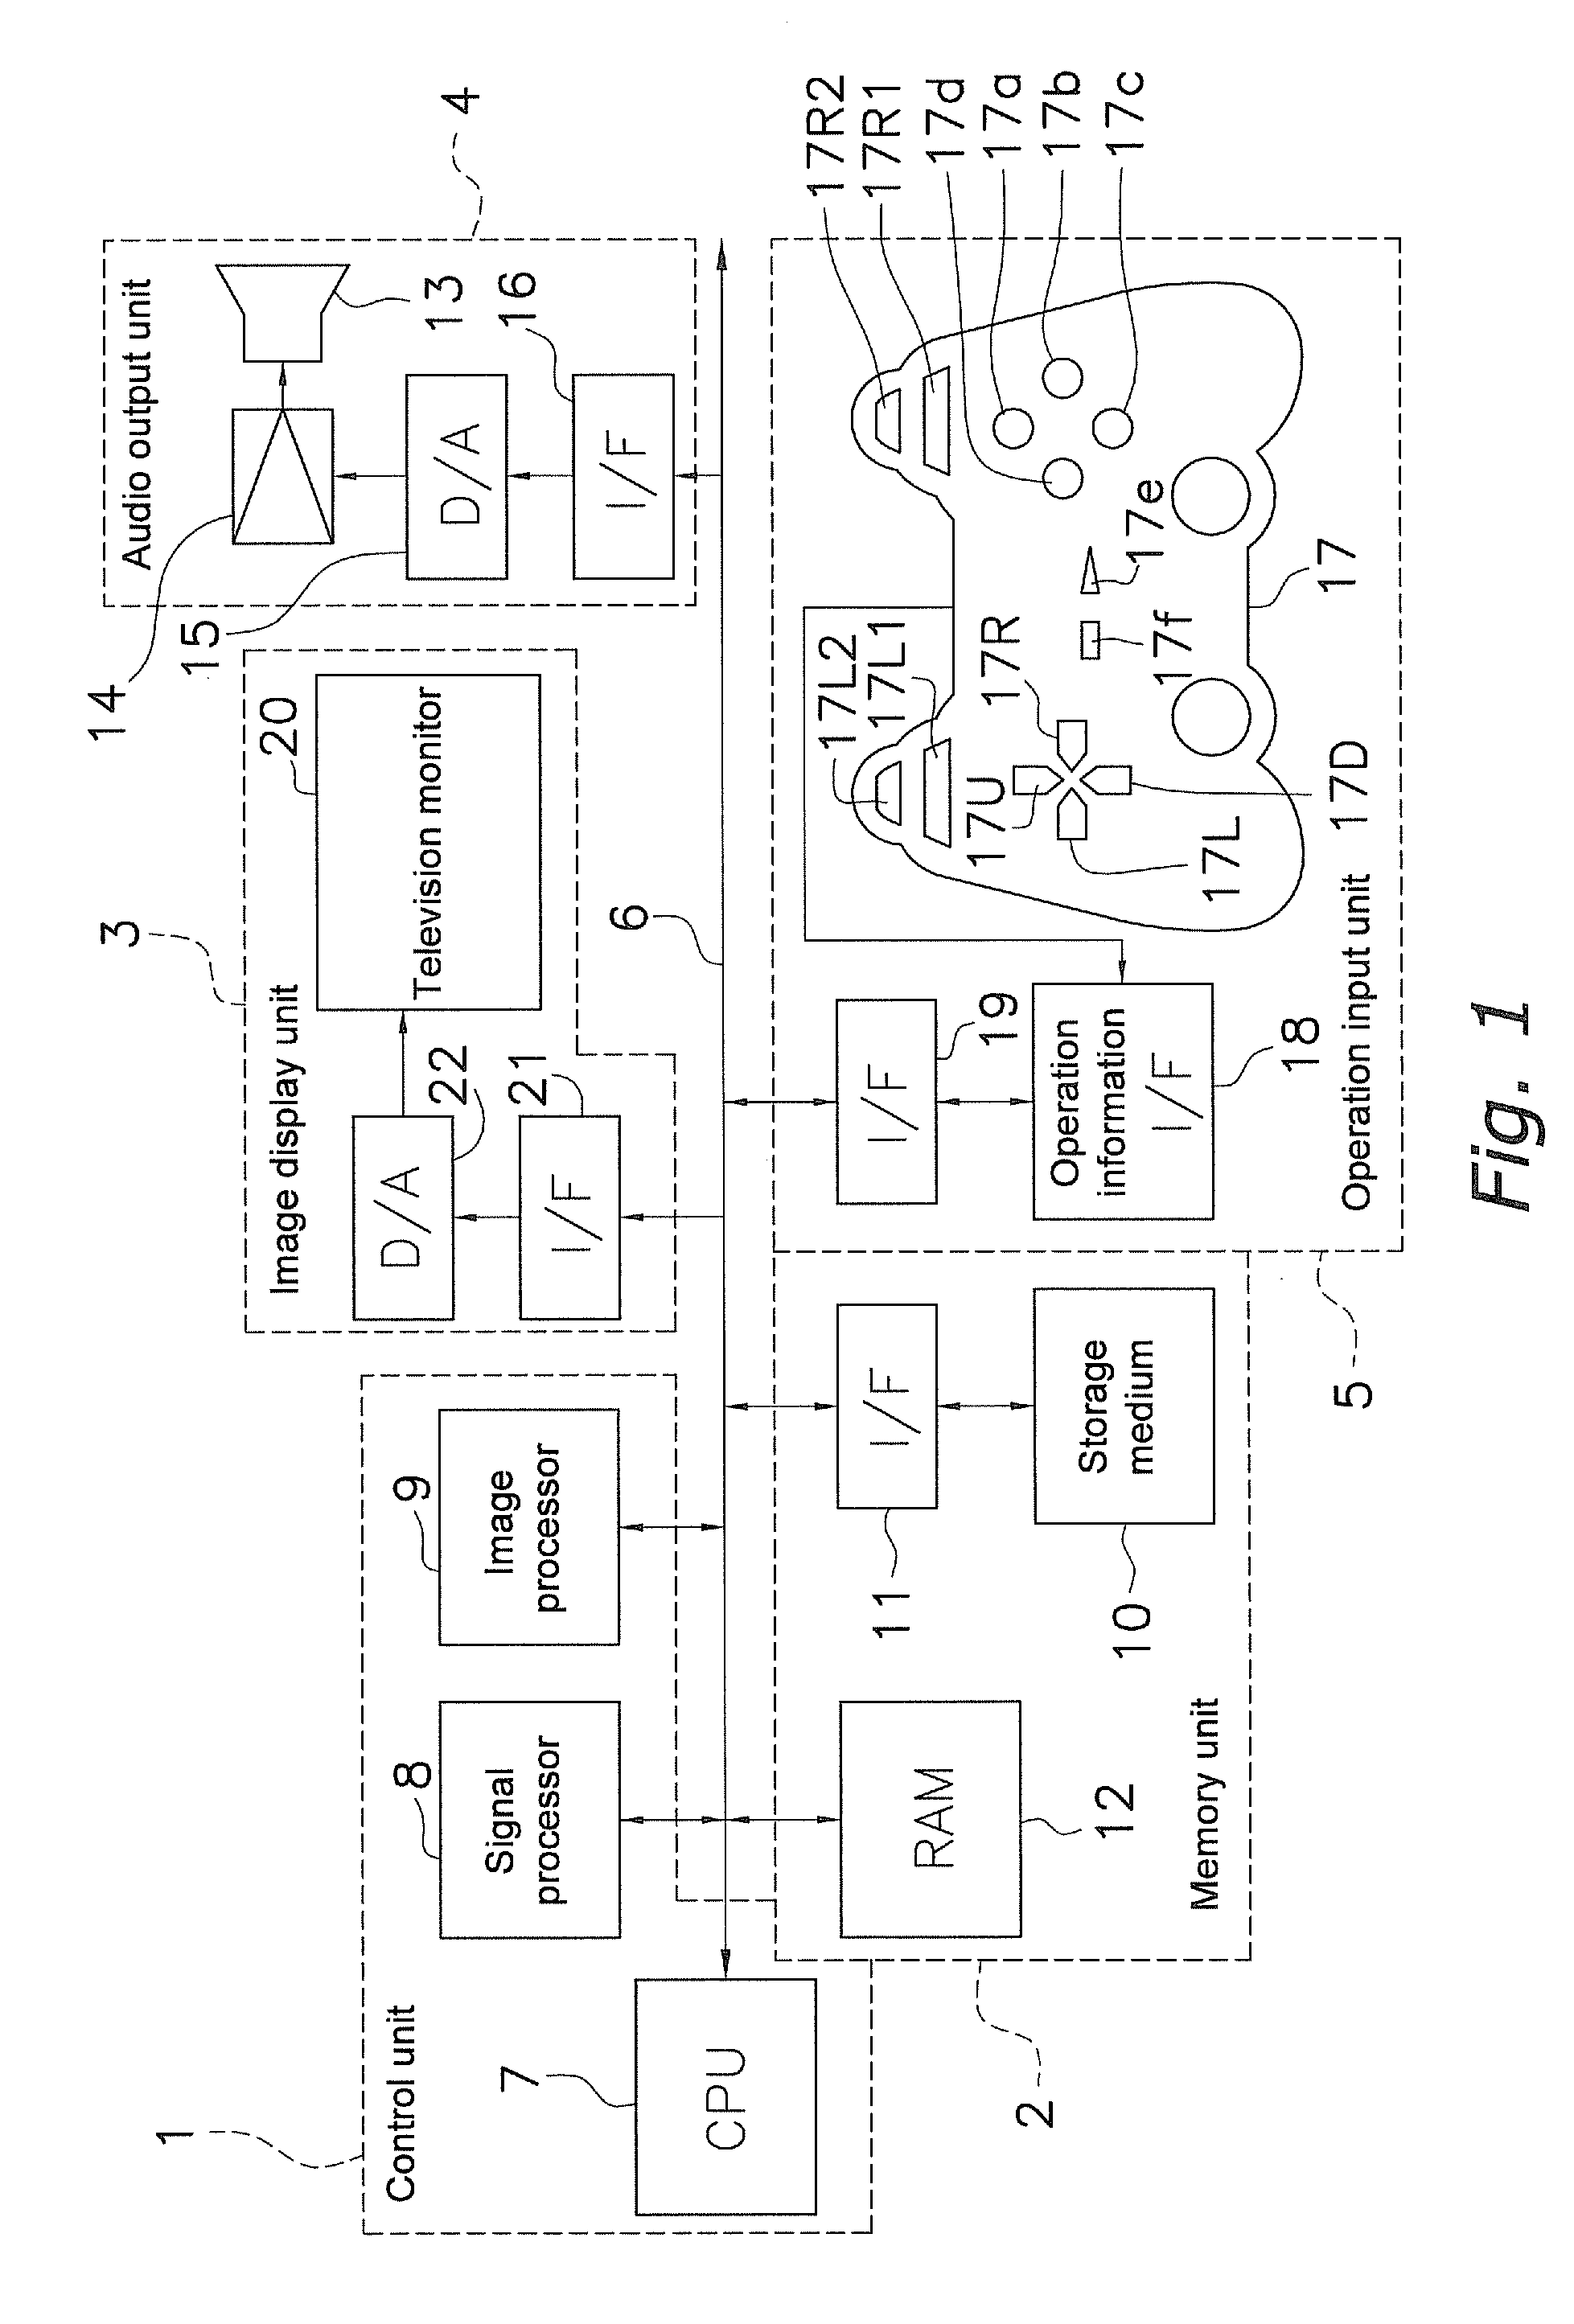 Video game program, video game device, and video game method